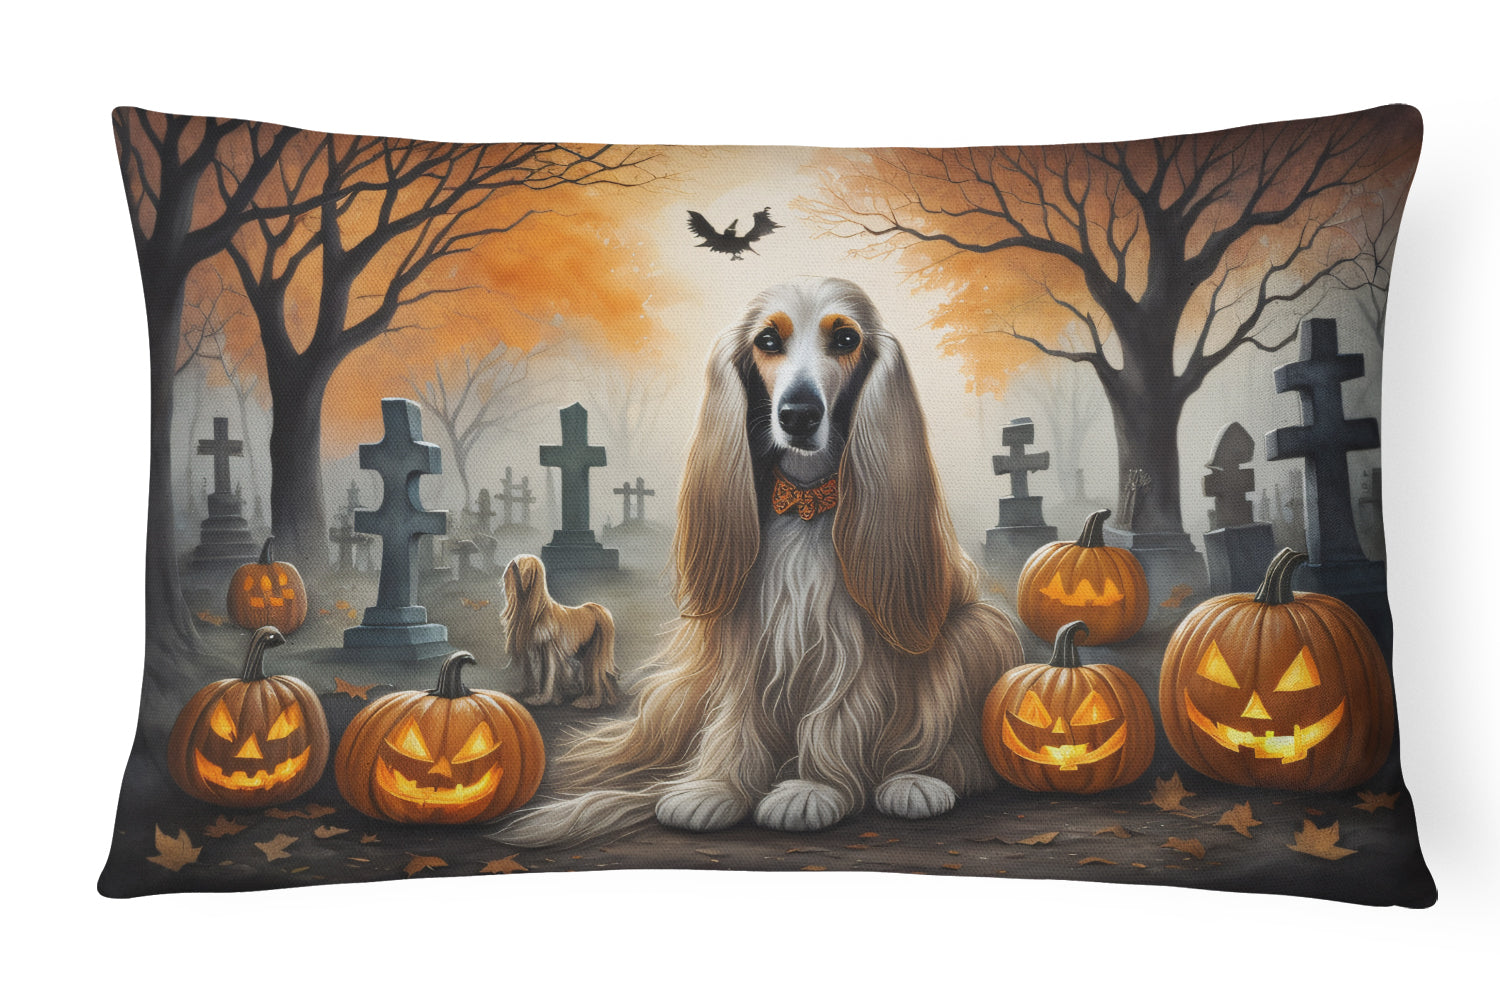 Buy this Afghan Hound Spooky Halloween Fabric Decorative Pillow